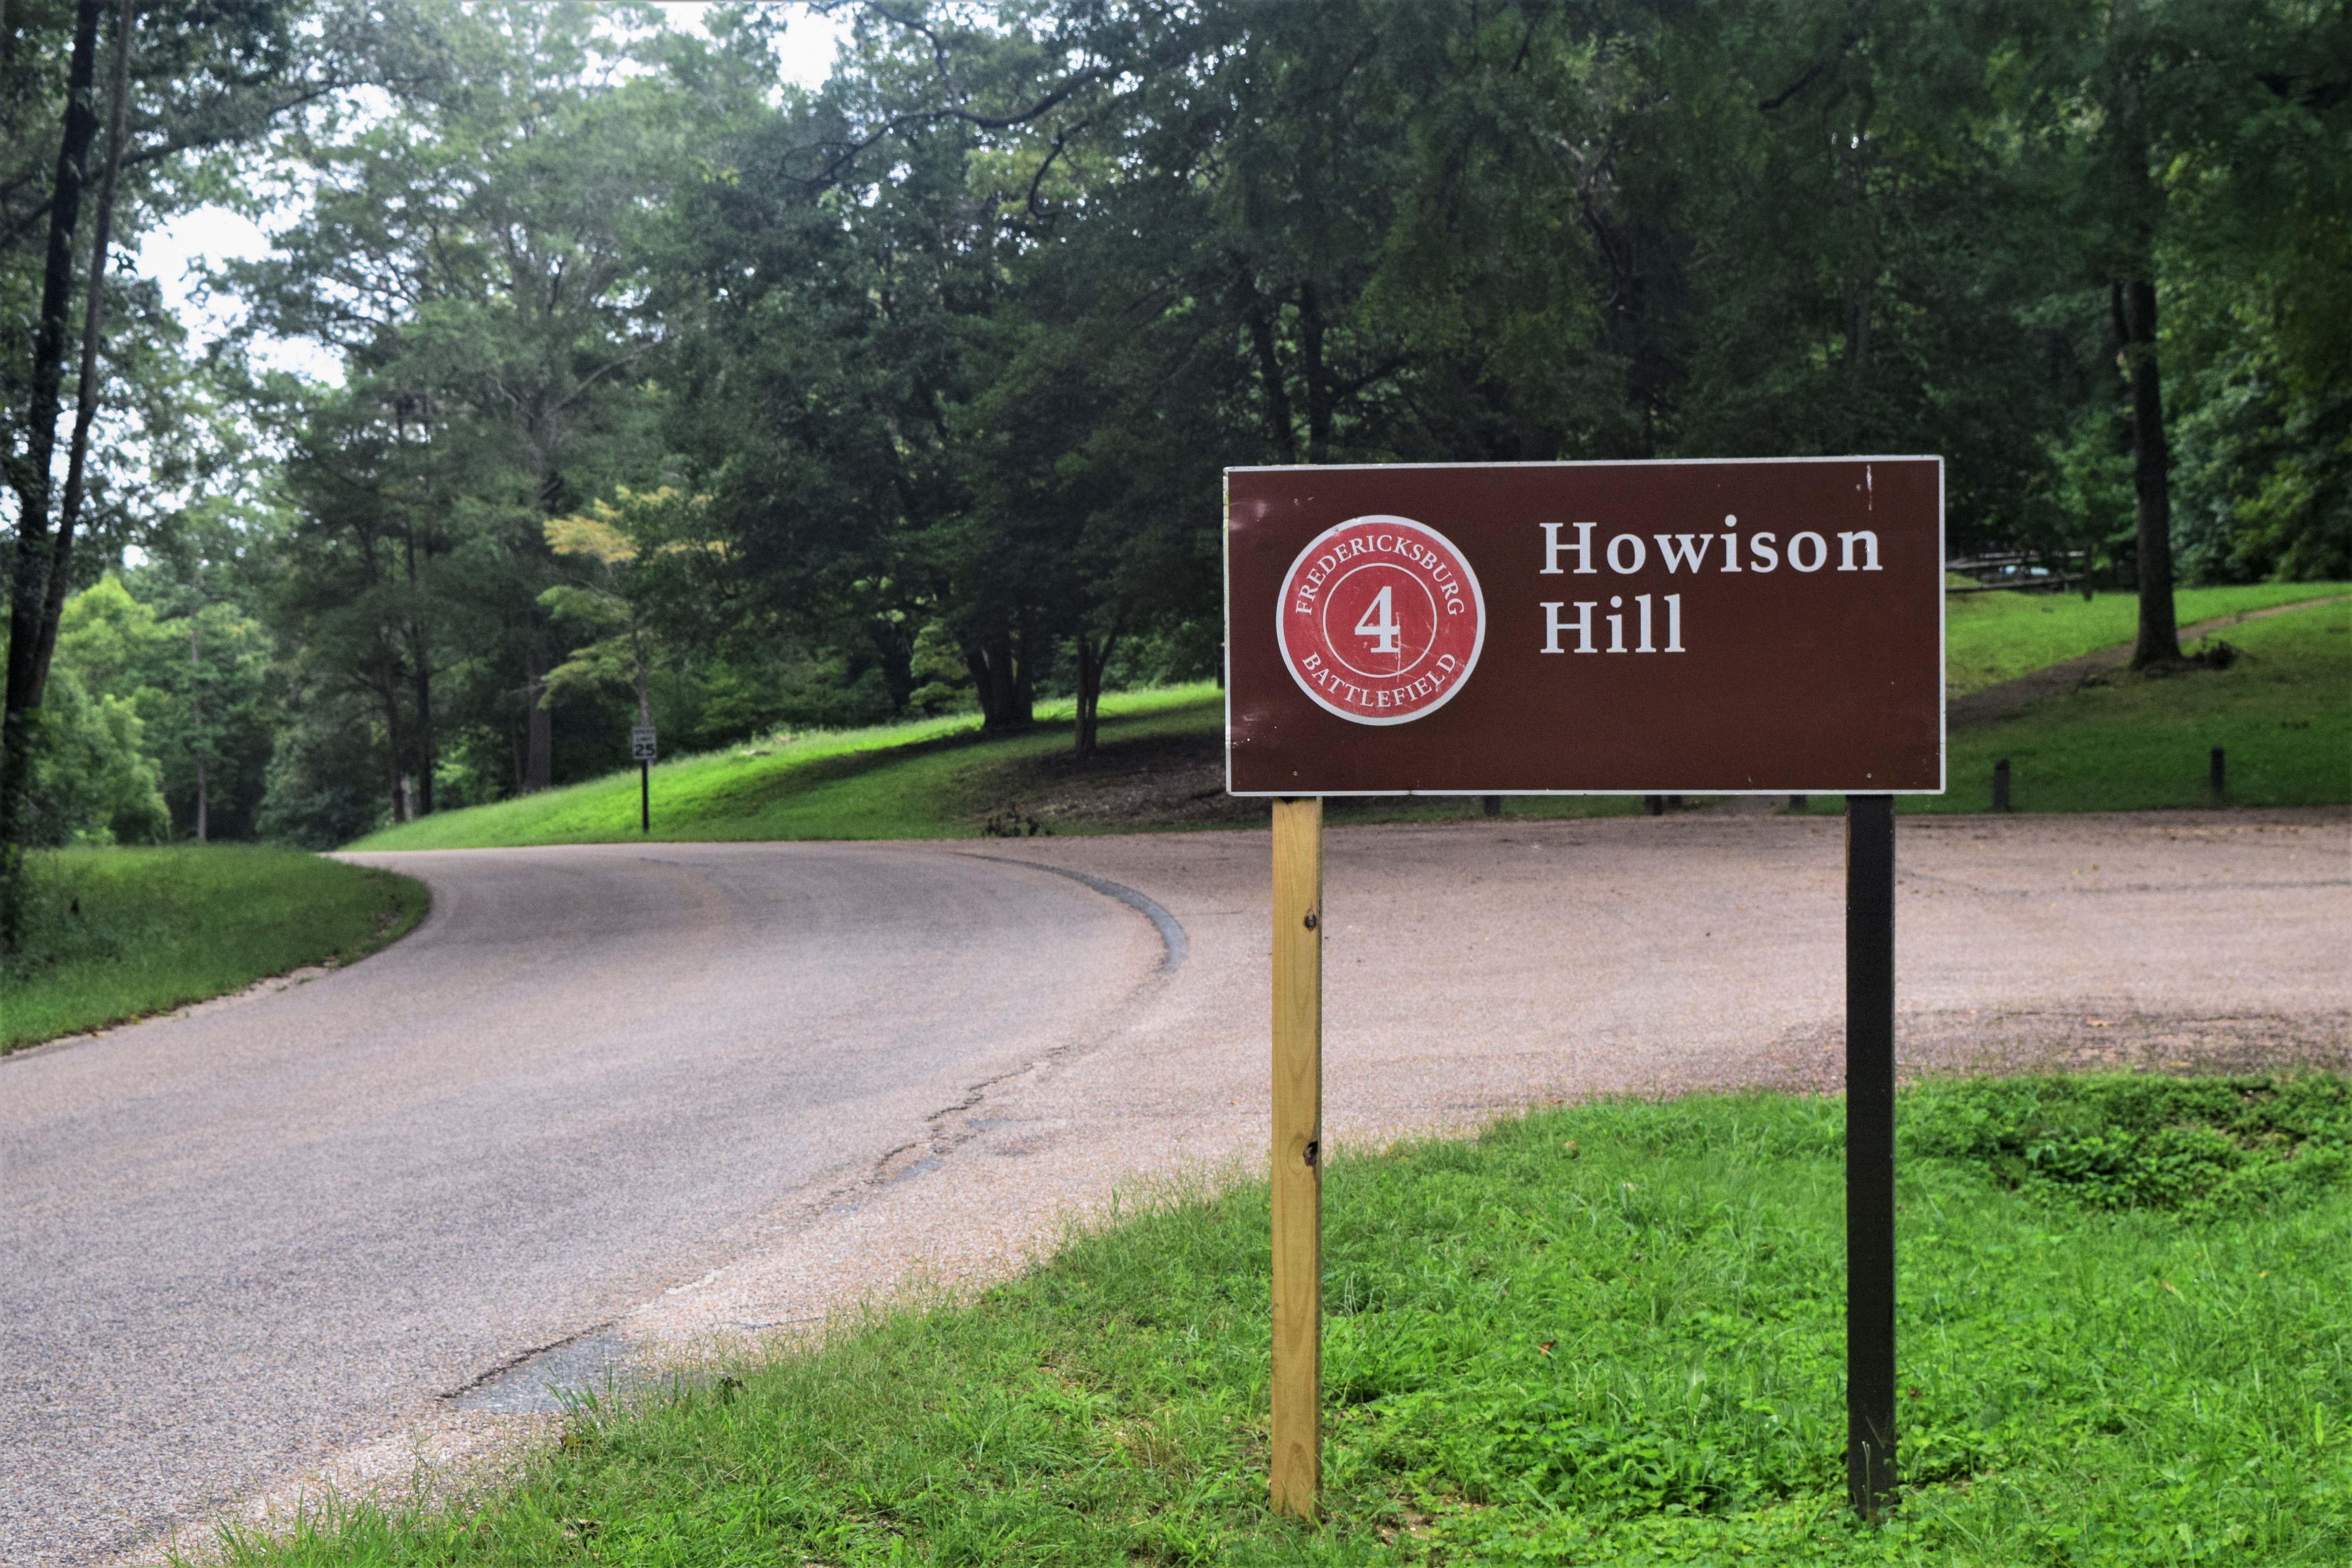 Park sign along a road for Howison Hill.